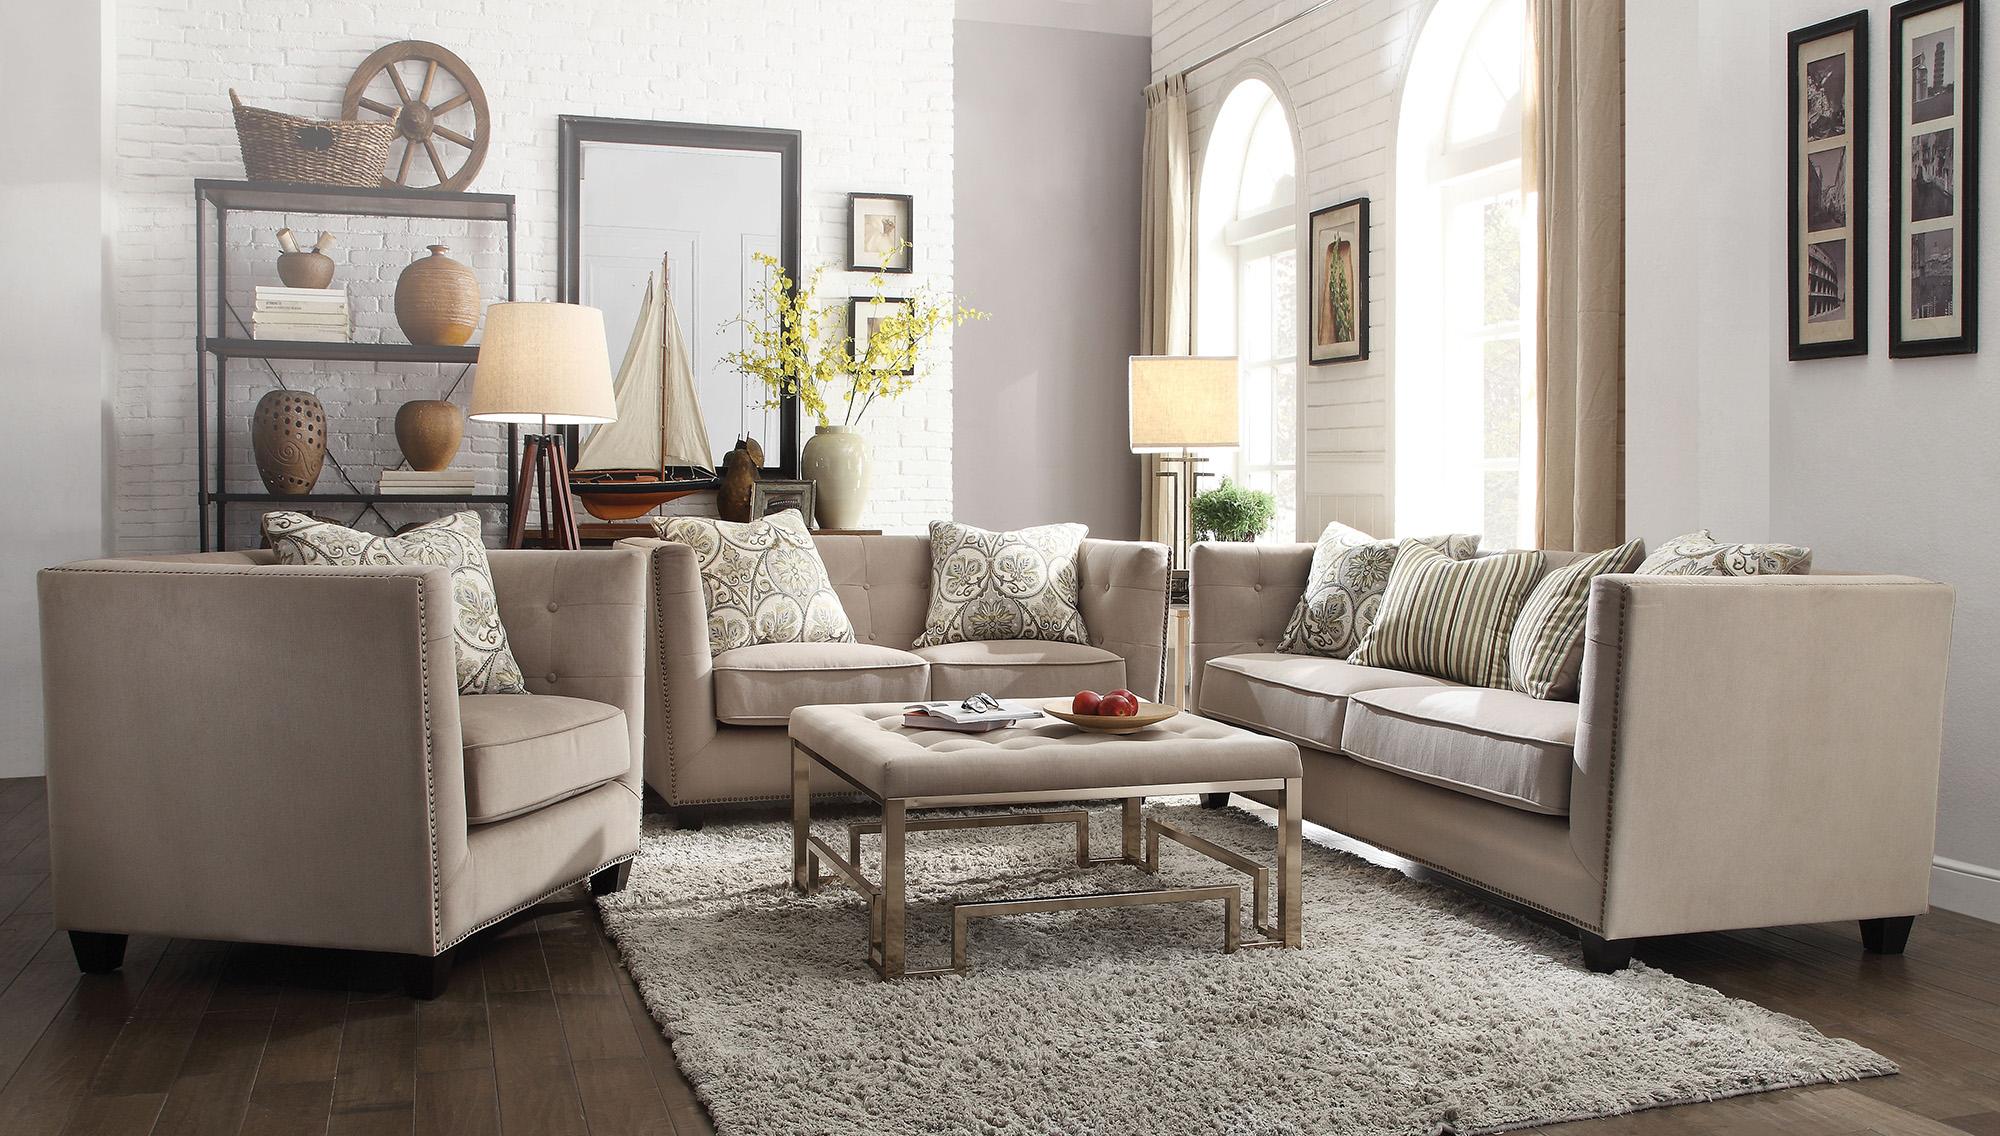 Contemporary, Traditional Sofa Loveseat and Chair Set Juliana Juliana-53585-Set-3 in Beige Fabric